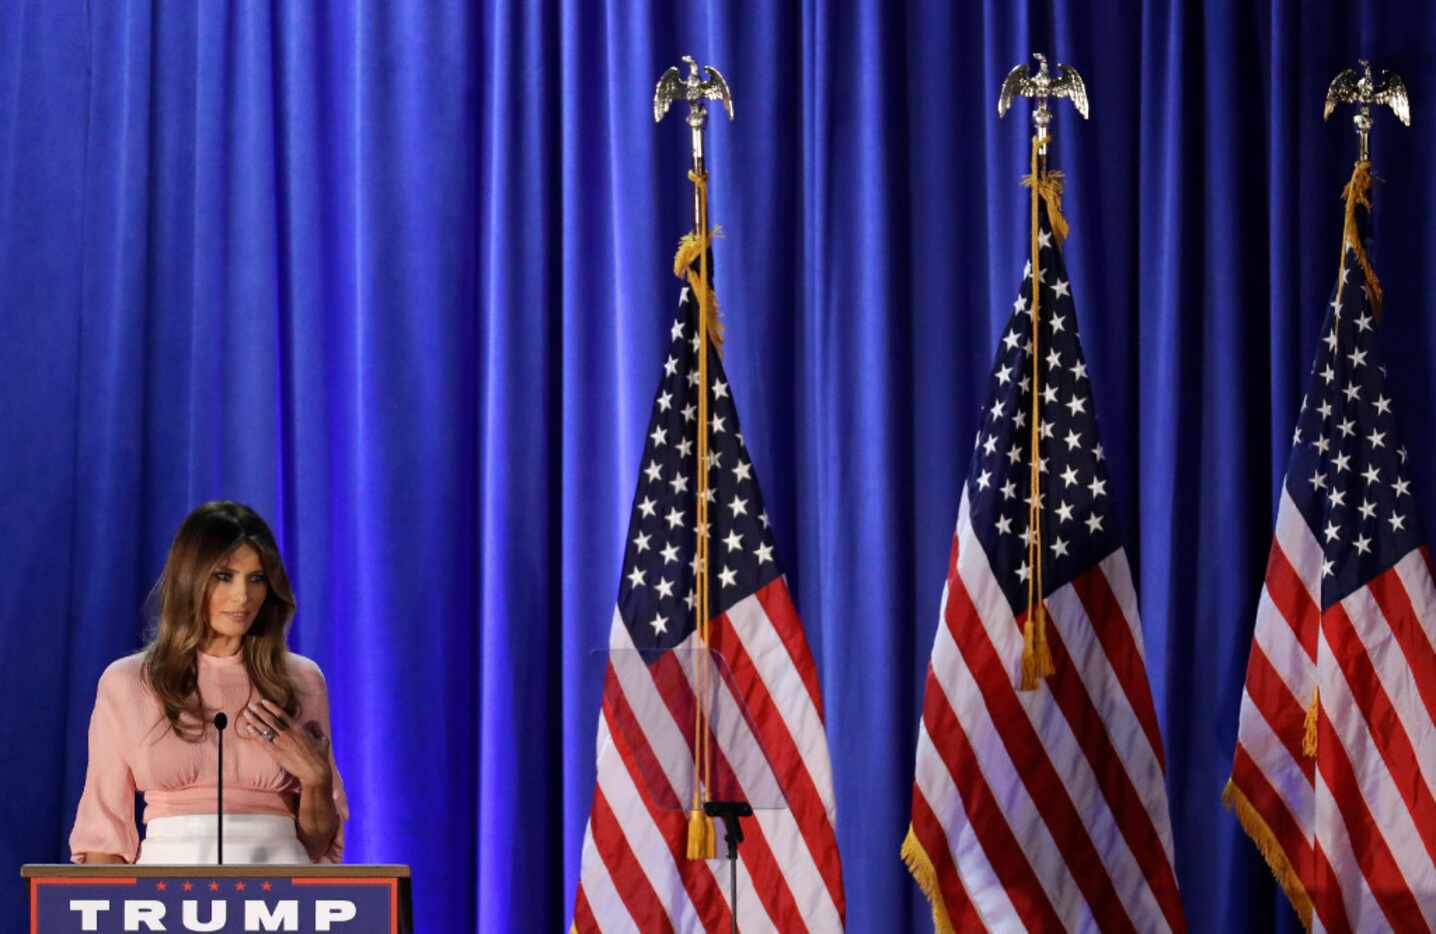 Melania Trump called for increased civility during her speech Thursday. (Patrick...